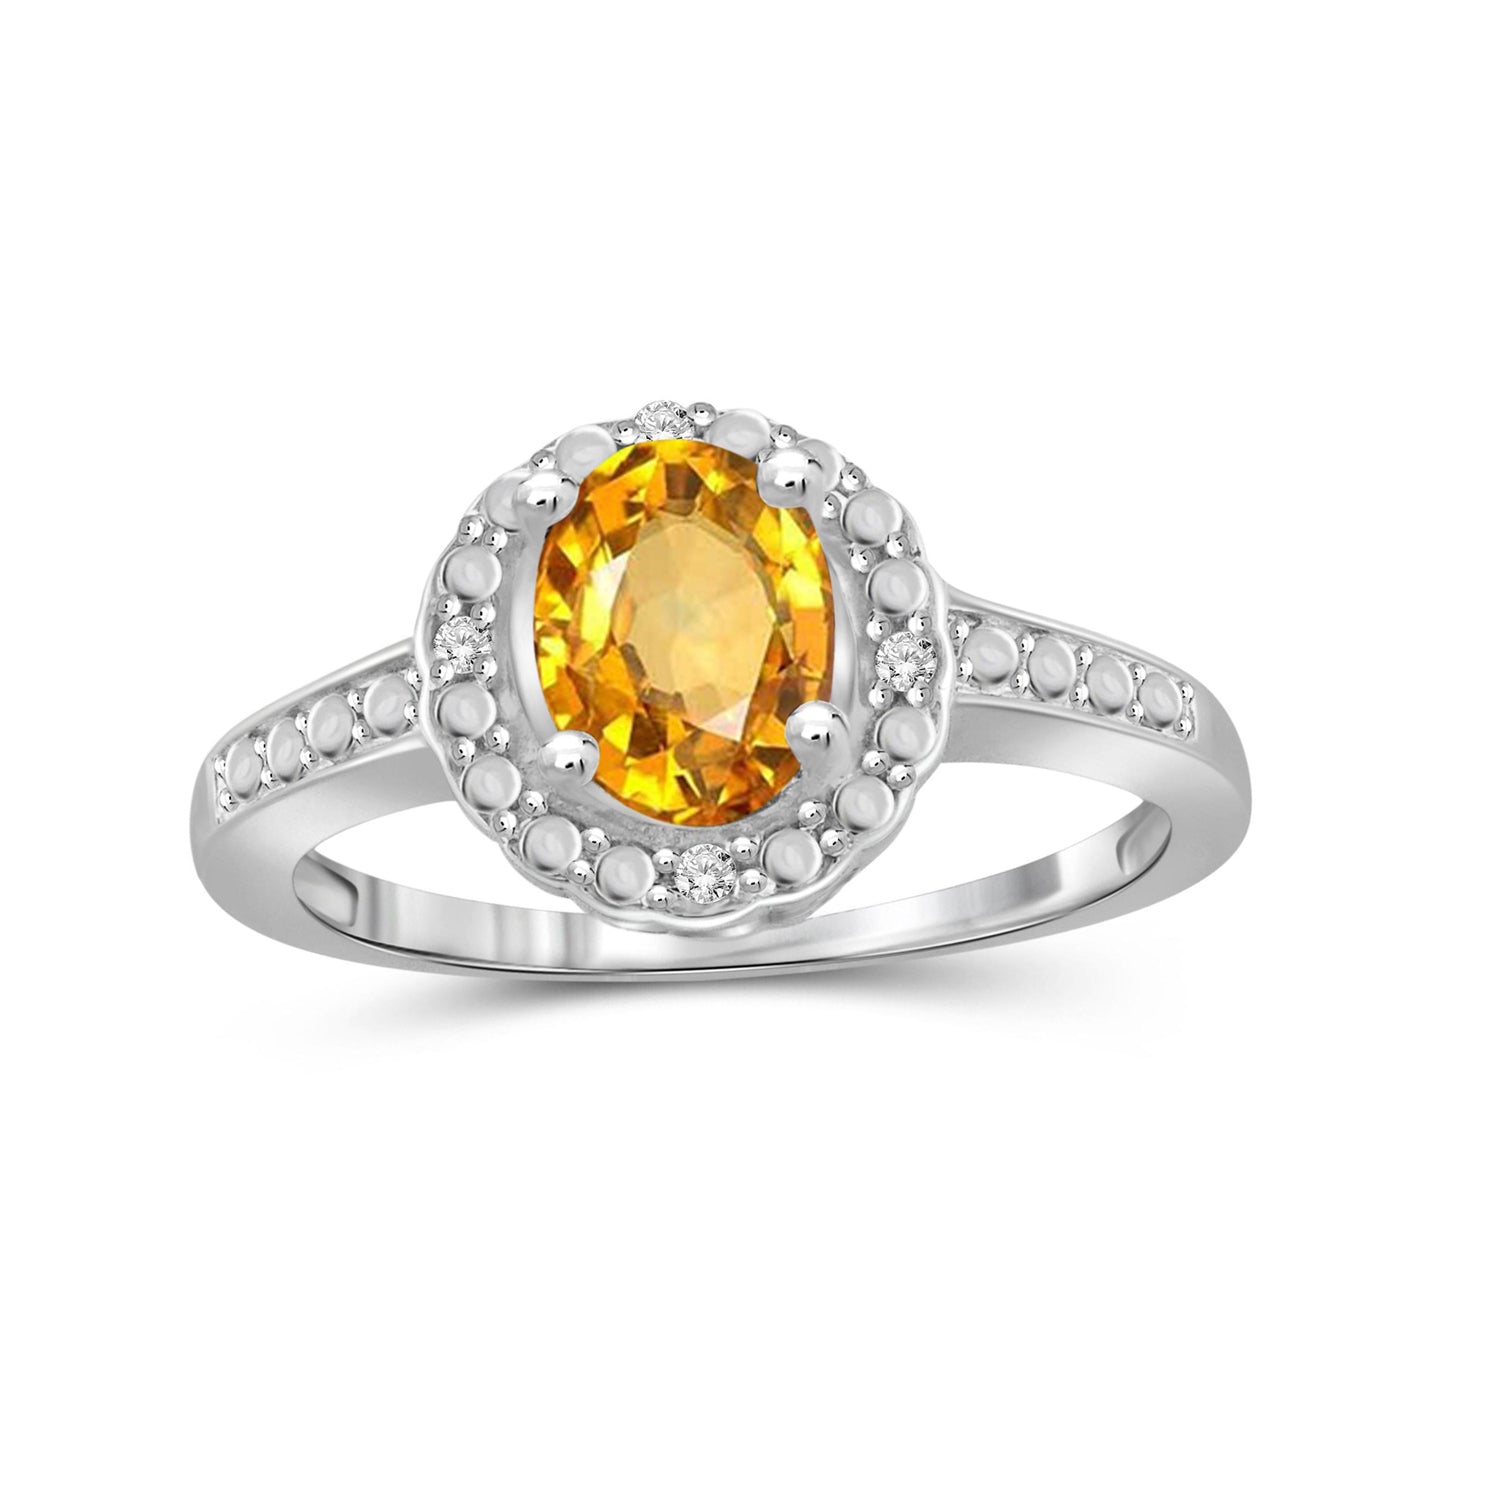 Citrine Ring Birthstone Jewelry – 1.10 Carat Citrine Sterling Silver Ring Jewelry with White Diamond Accent – Gemstone Rings with Hypoallergenic Sterling Silver Band